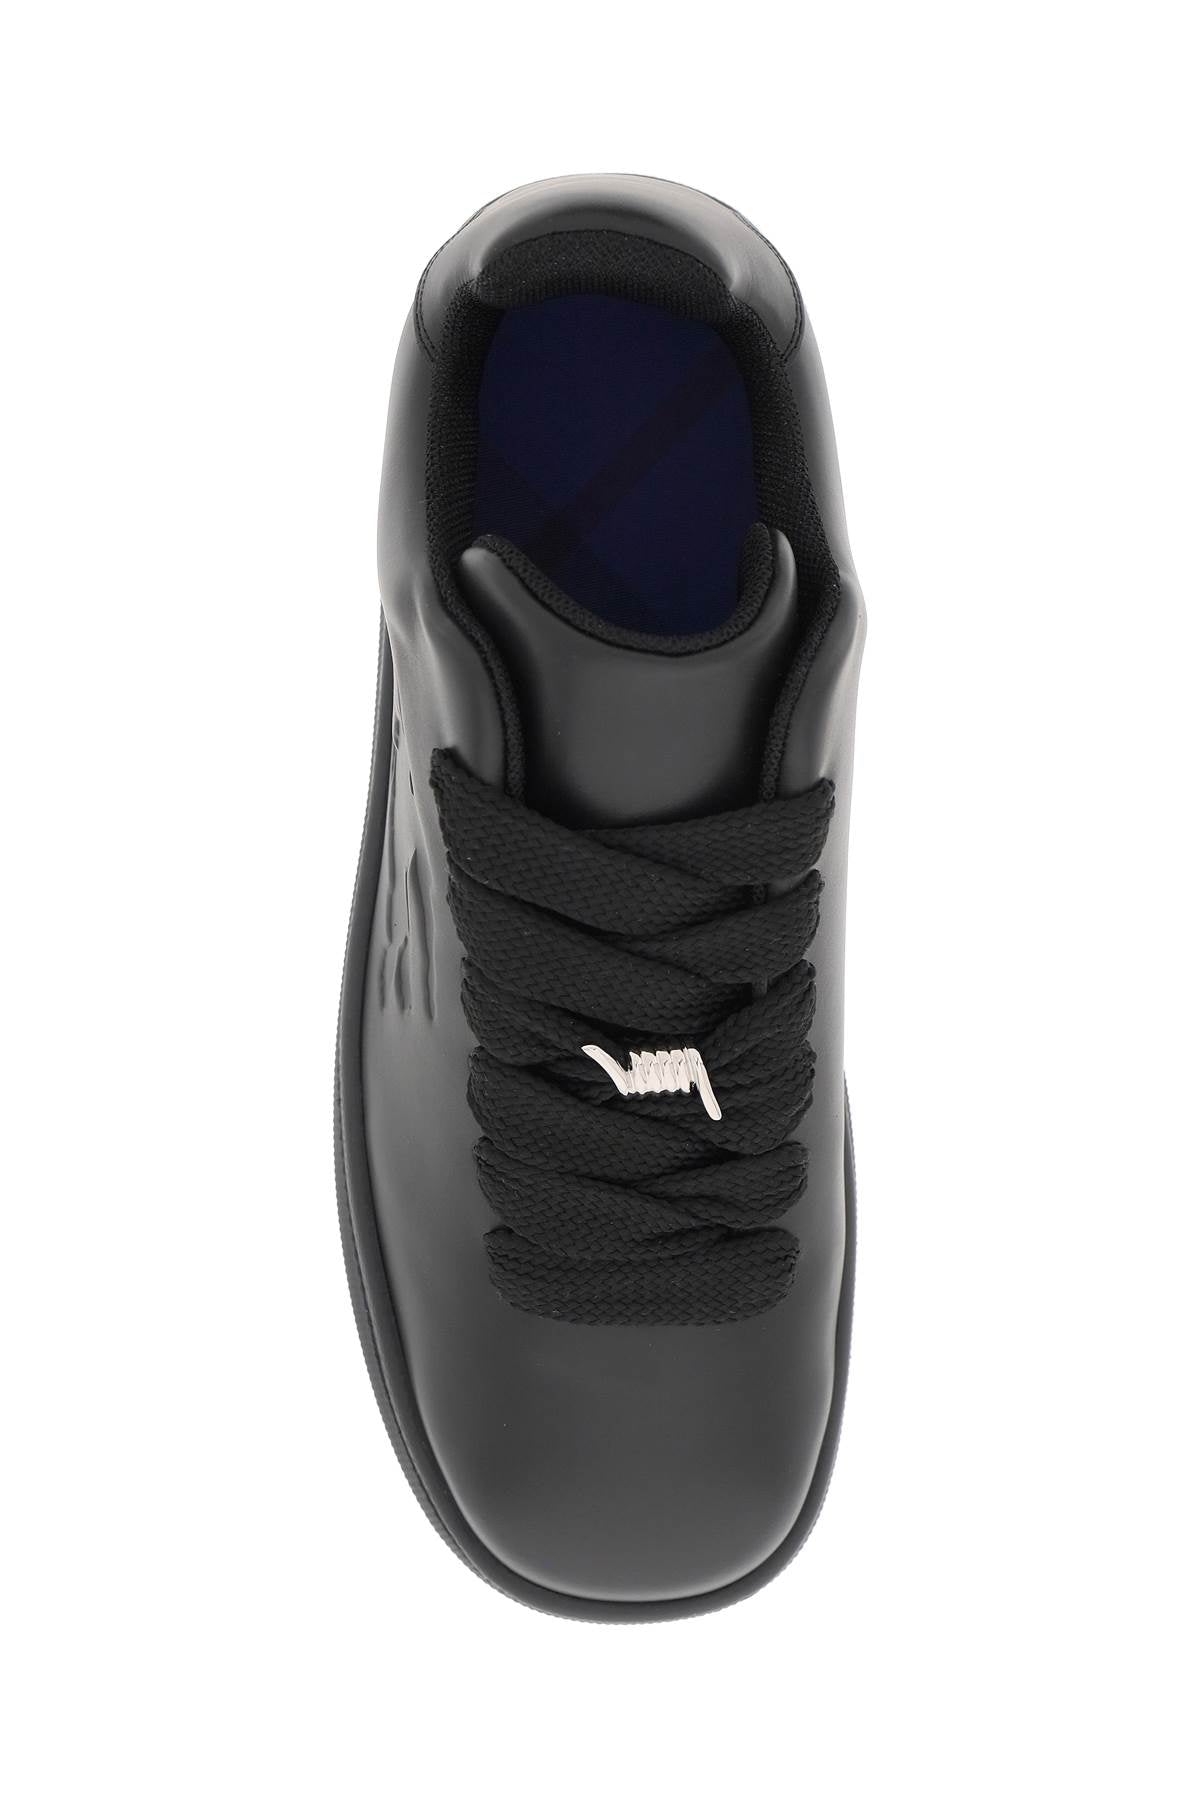 Burberry Storage Box Leather Sneakers Black